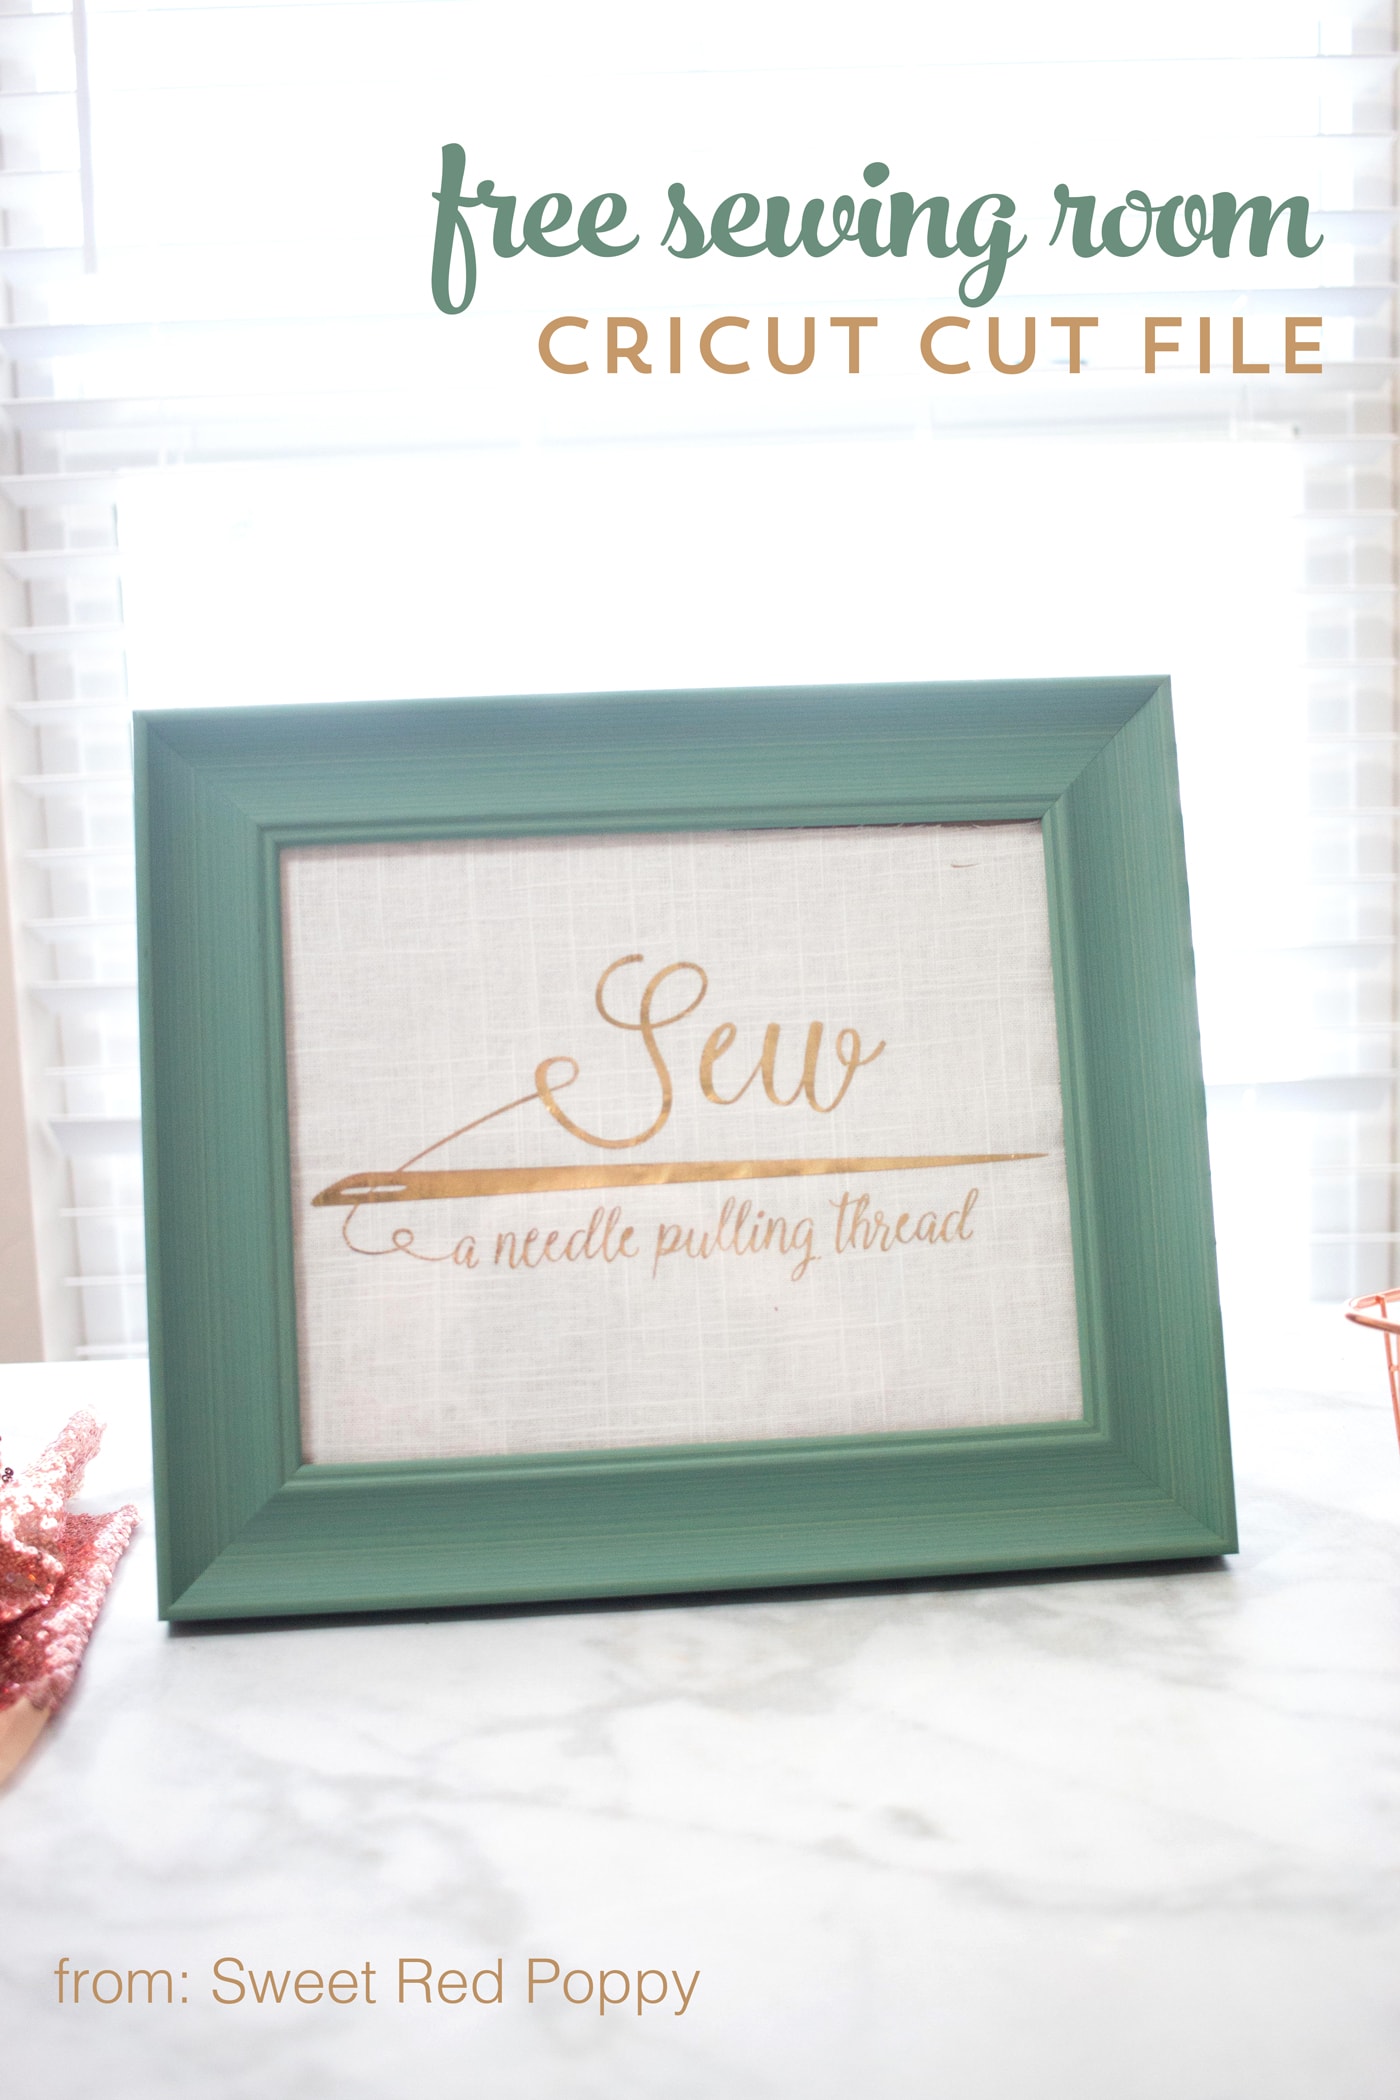 Free Sewing SVG Files & DIY Sewing Room Wall Decor Ideas